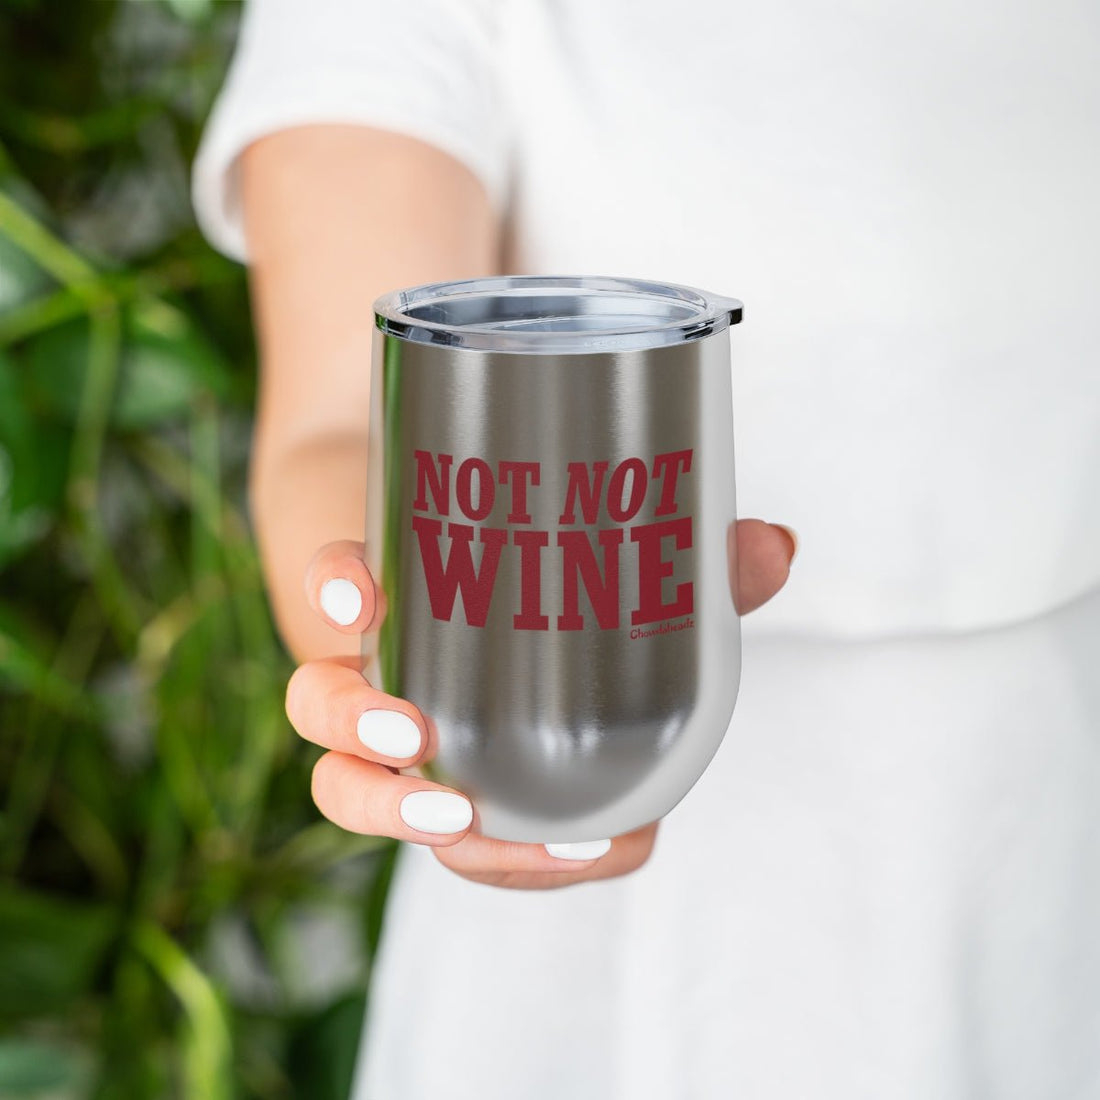 12 oz Stainless Steel Sublimation Wine Tumbler